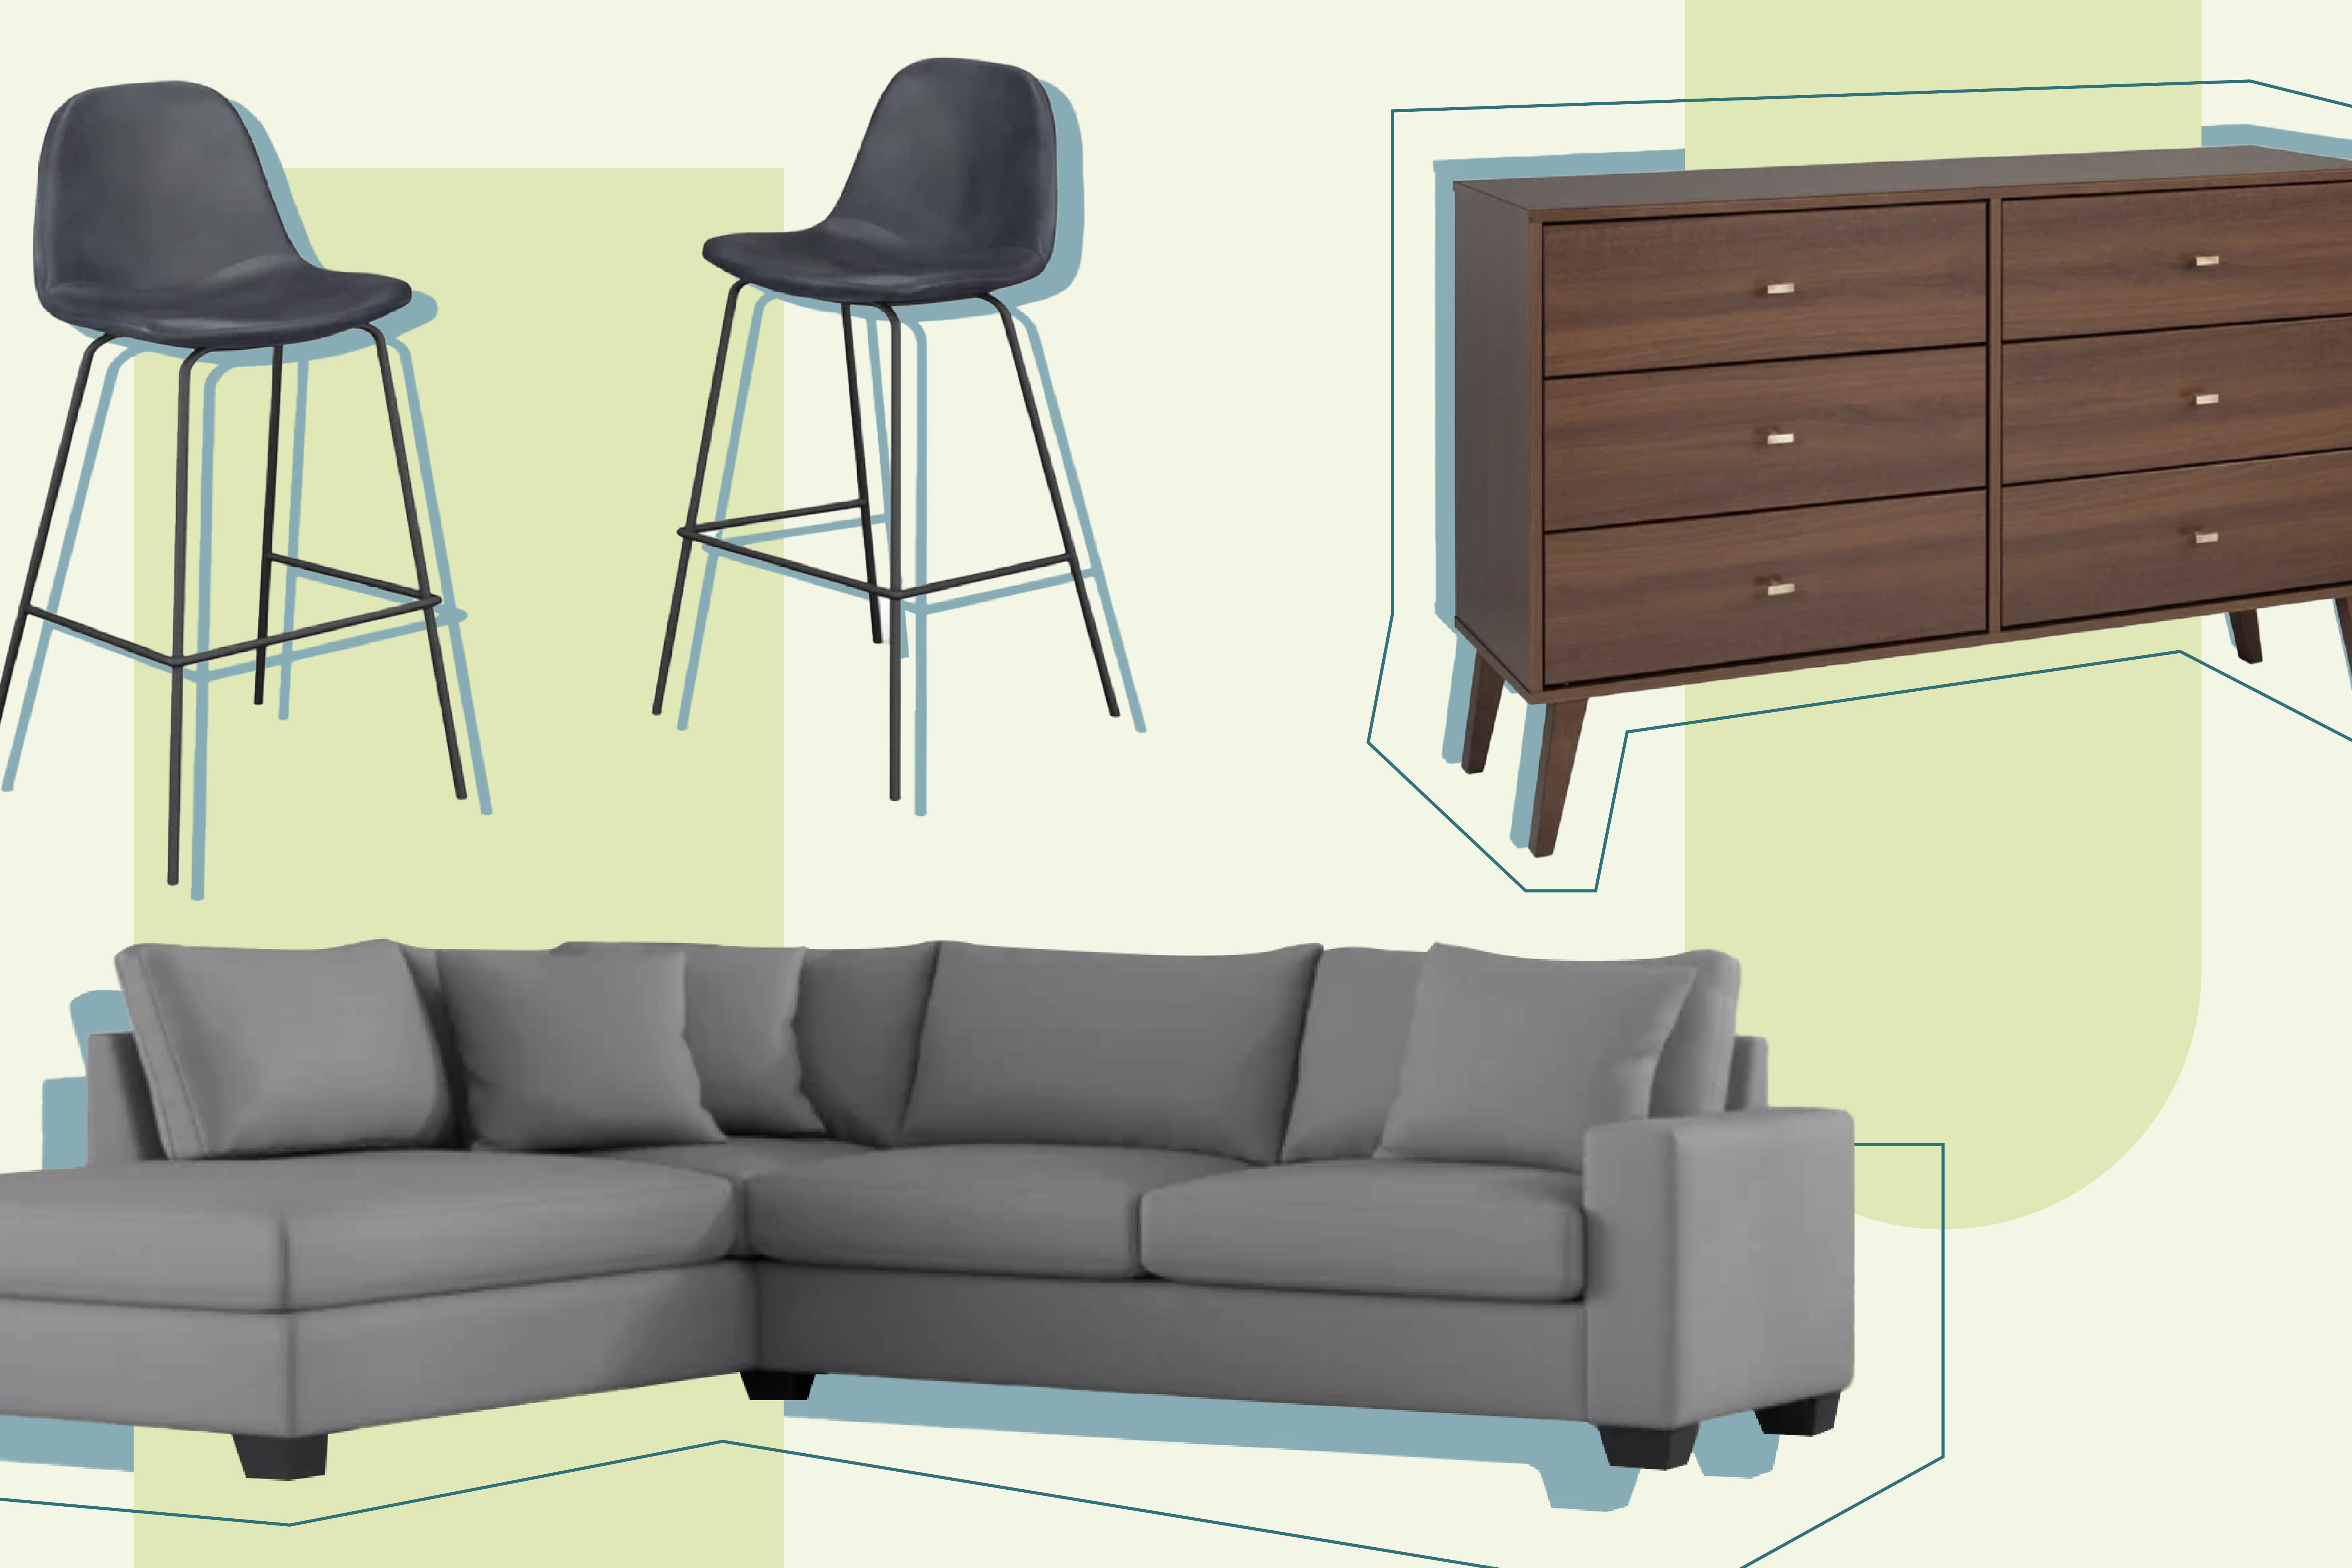 The Best Early Black Friday Deals to Shop at Wayfair